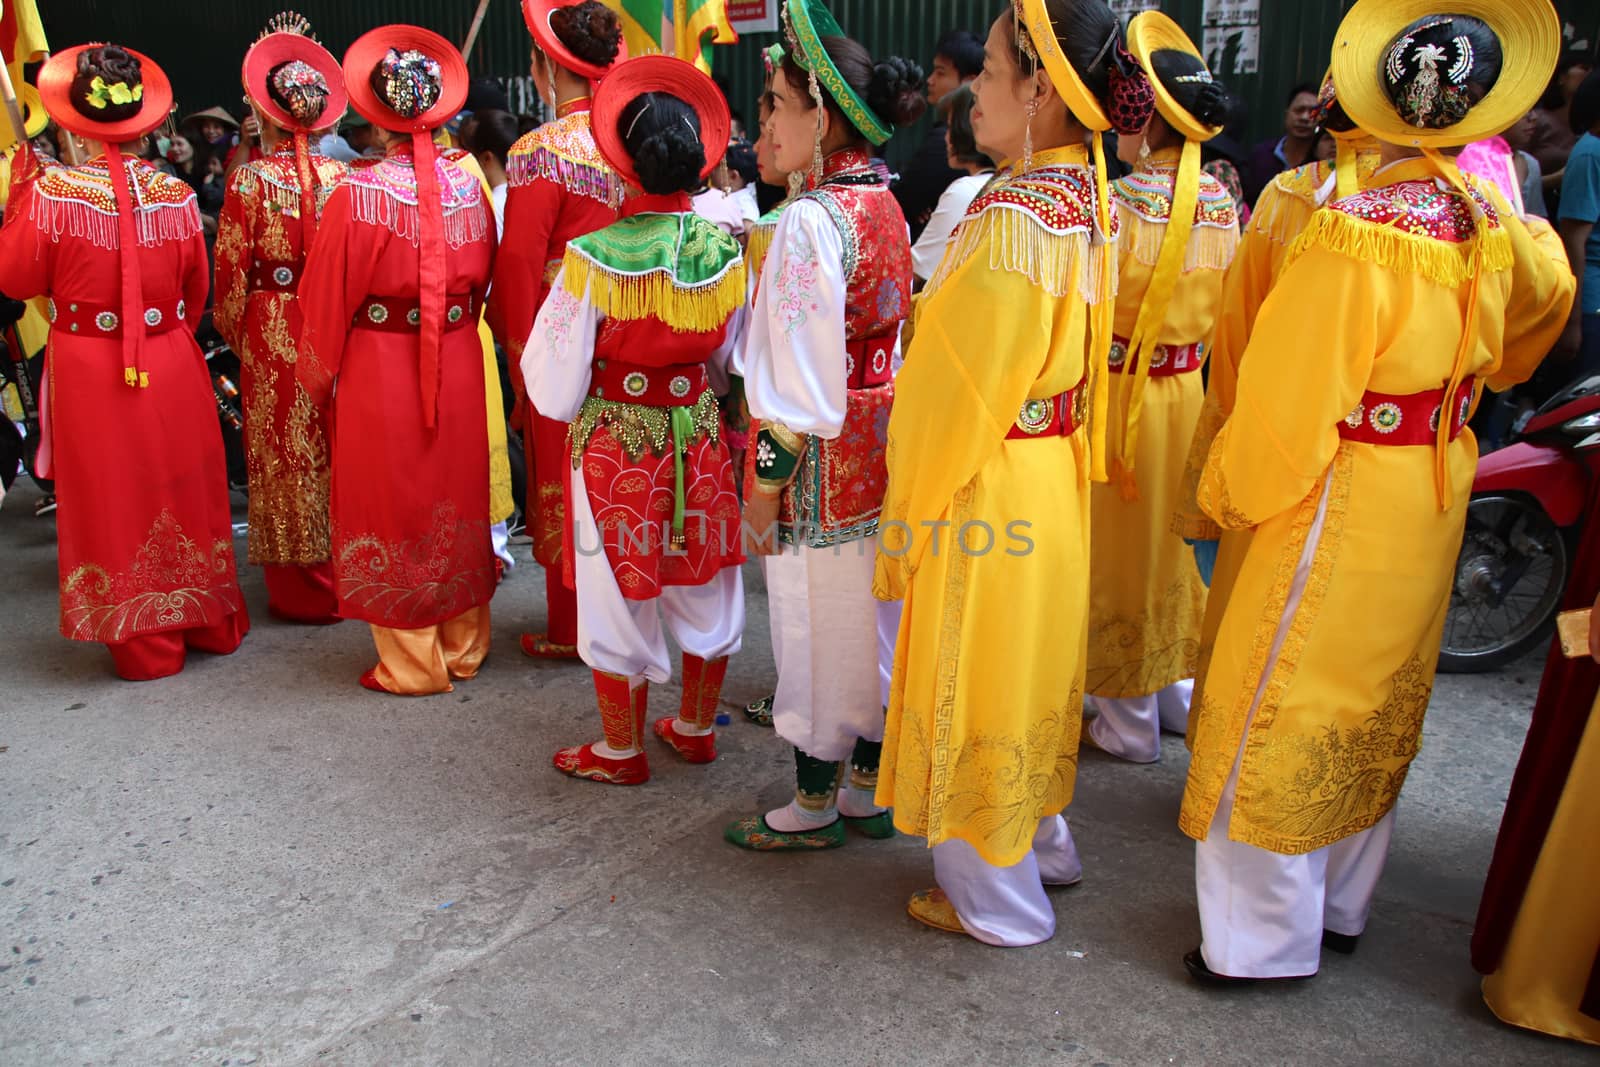 Street parade during the traditional Dong Ky Firecracker Festival (Hoi Phao Dong Ky) in Bac Ninh Vietnam